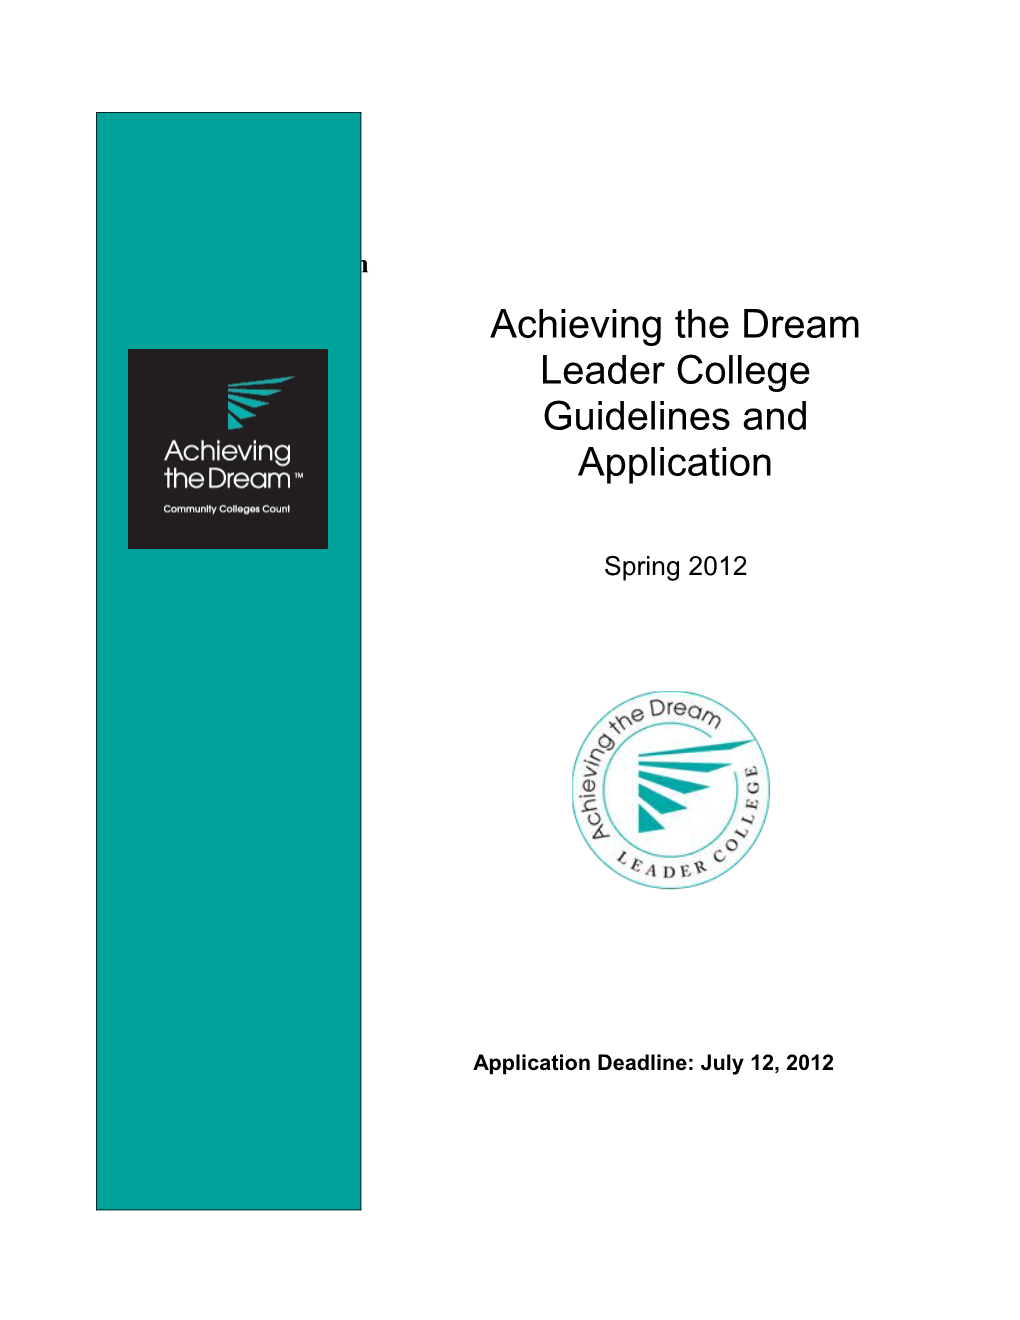 Achieving the Dream Leader College Guidelines and Application